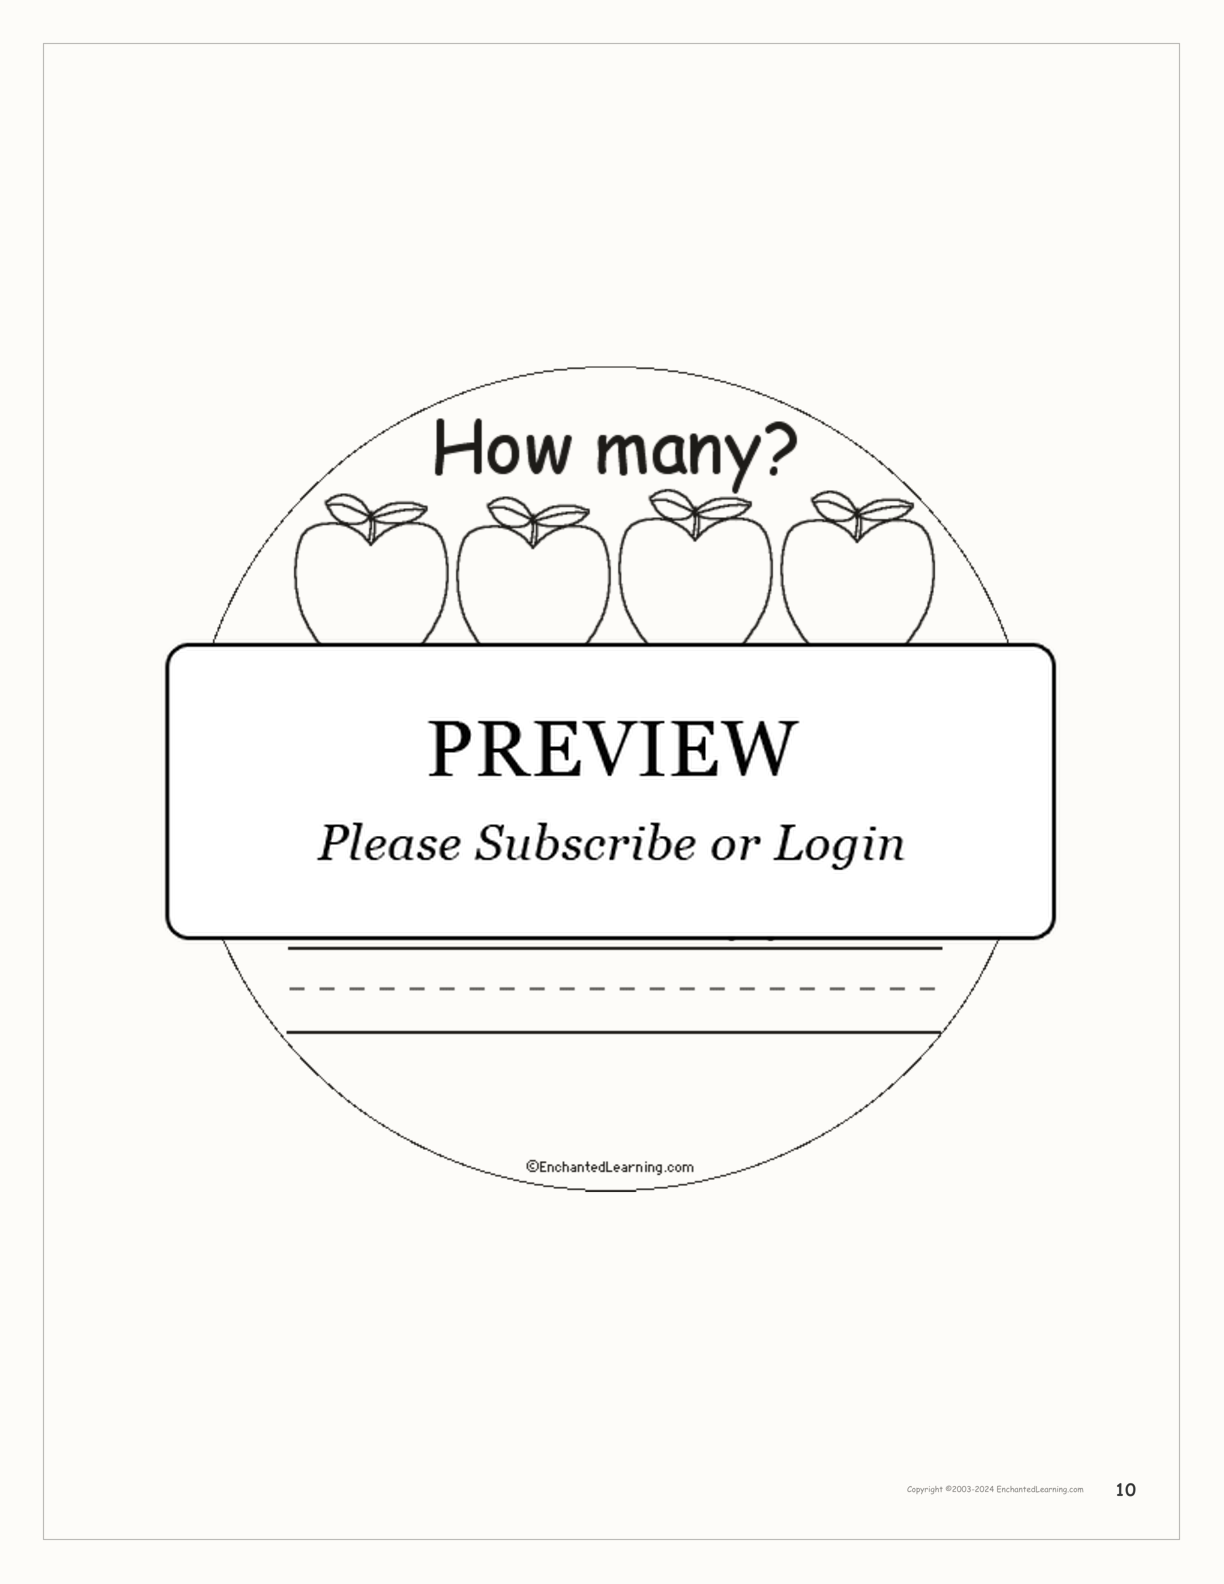 How Many Apples? interactive printout page 10